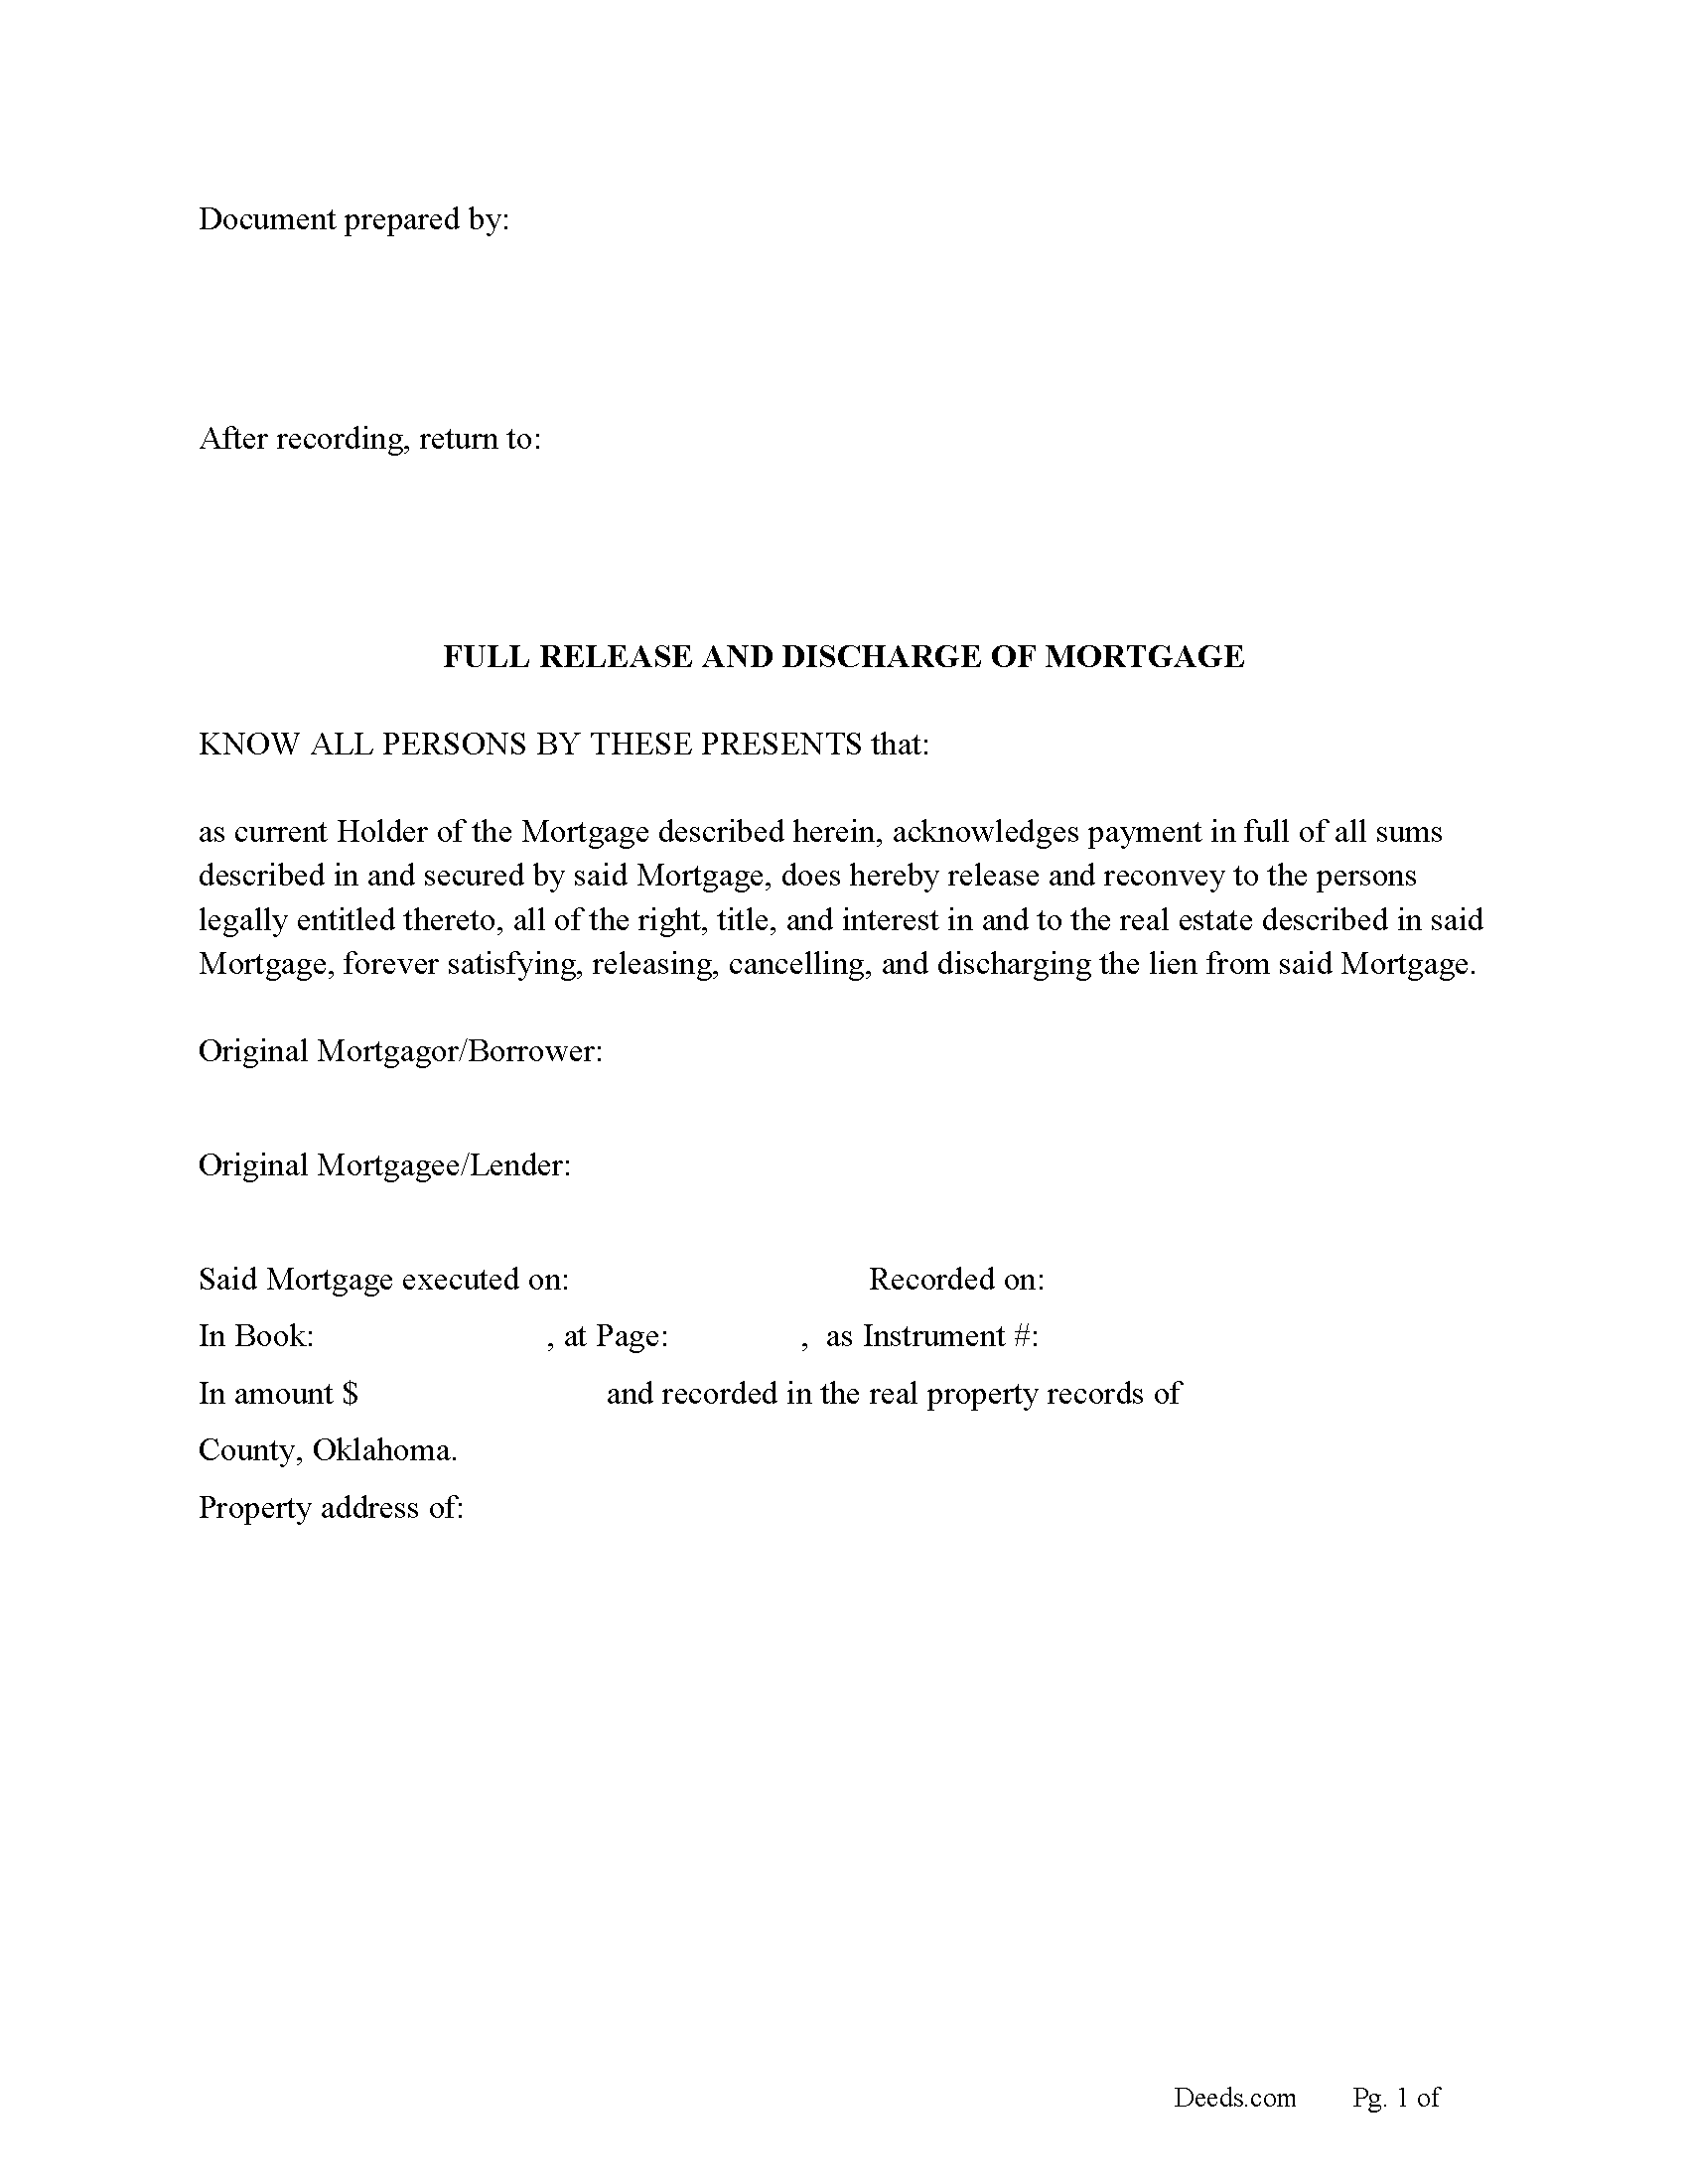 Full Release and Discharge of Mortgage Form